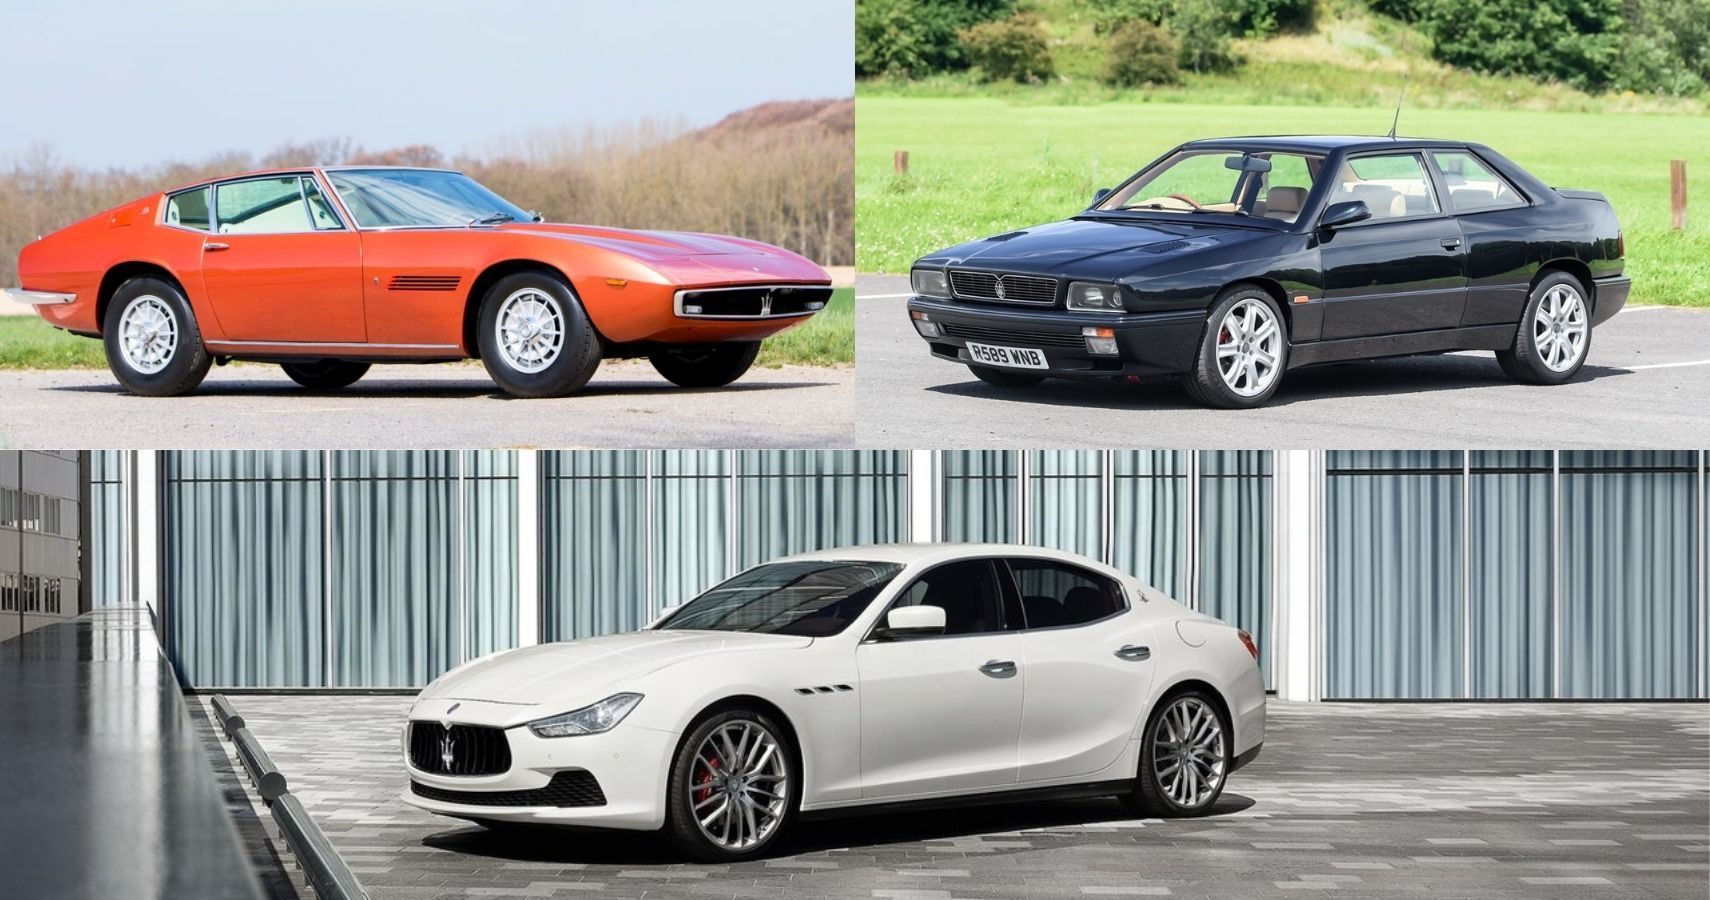 All 3 generations of the Maserati Ghibli collage